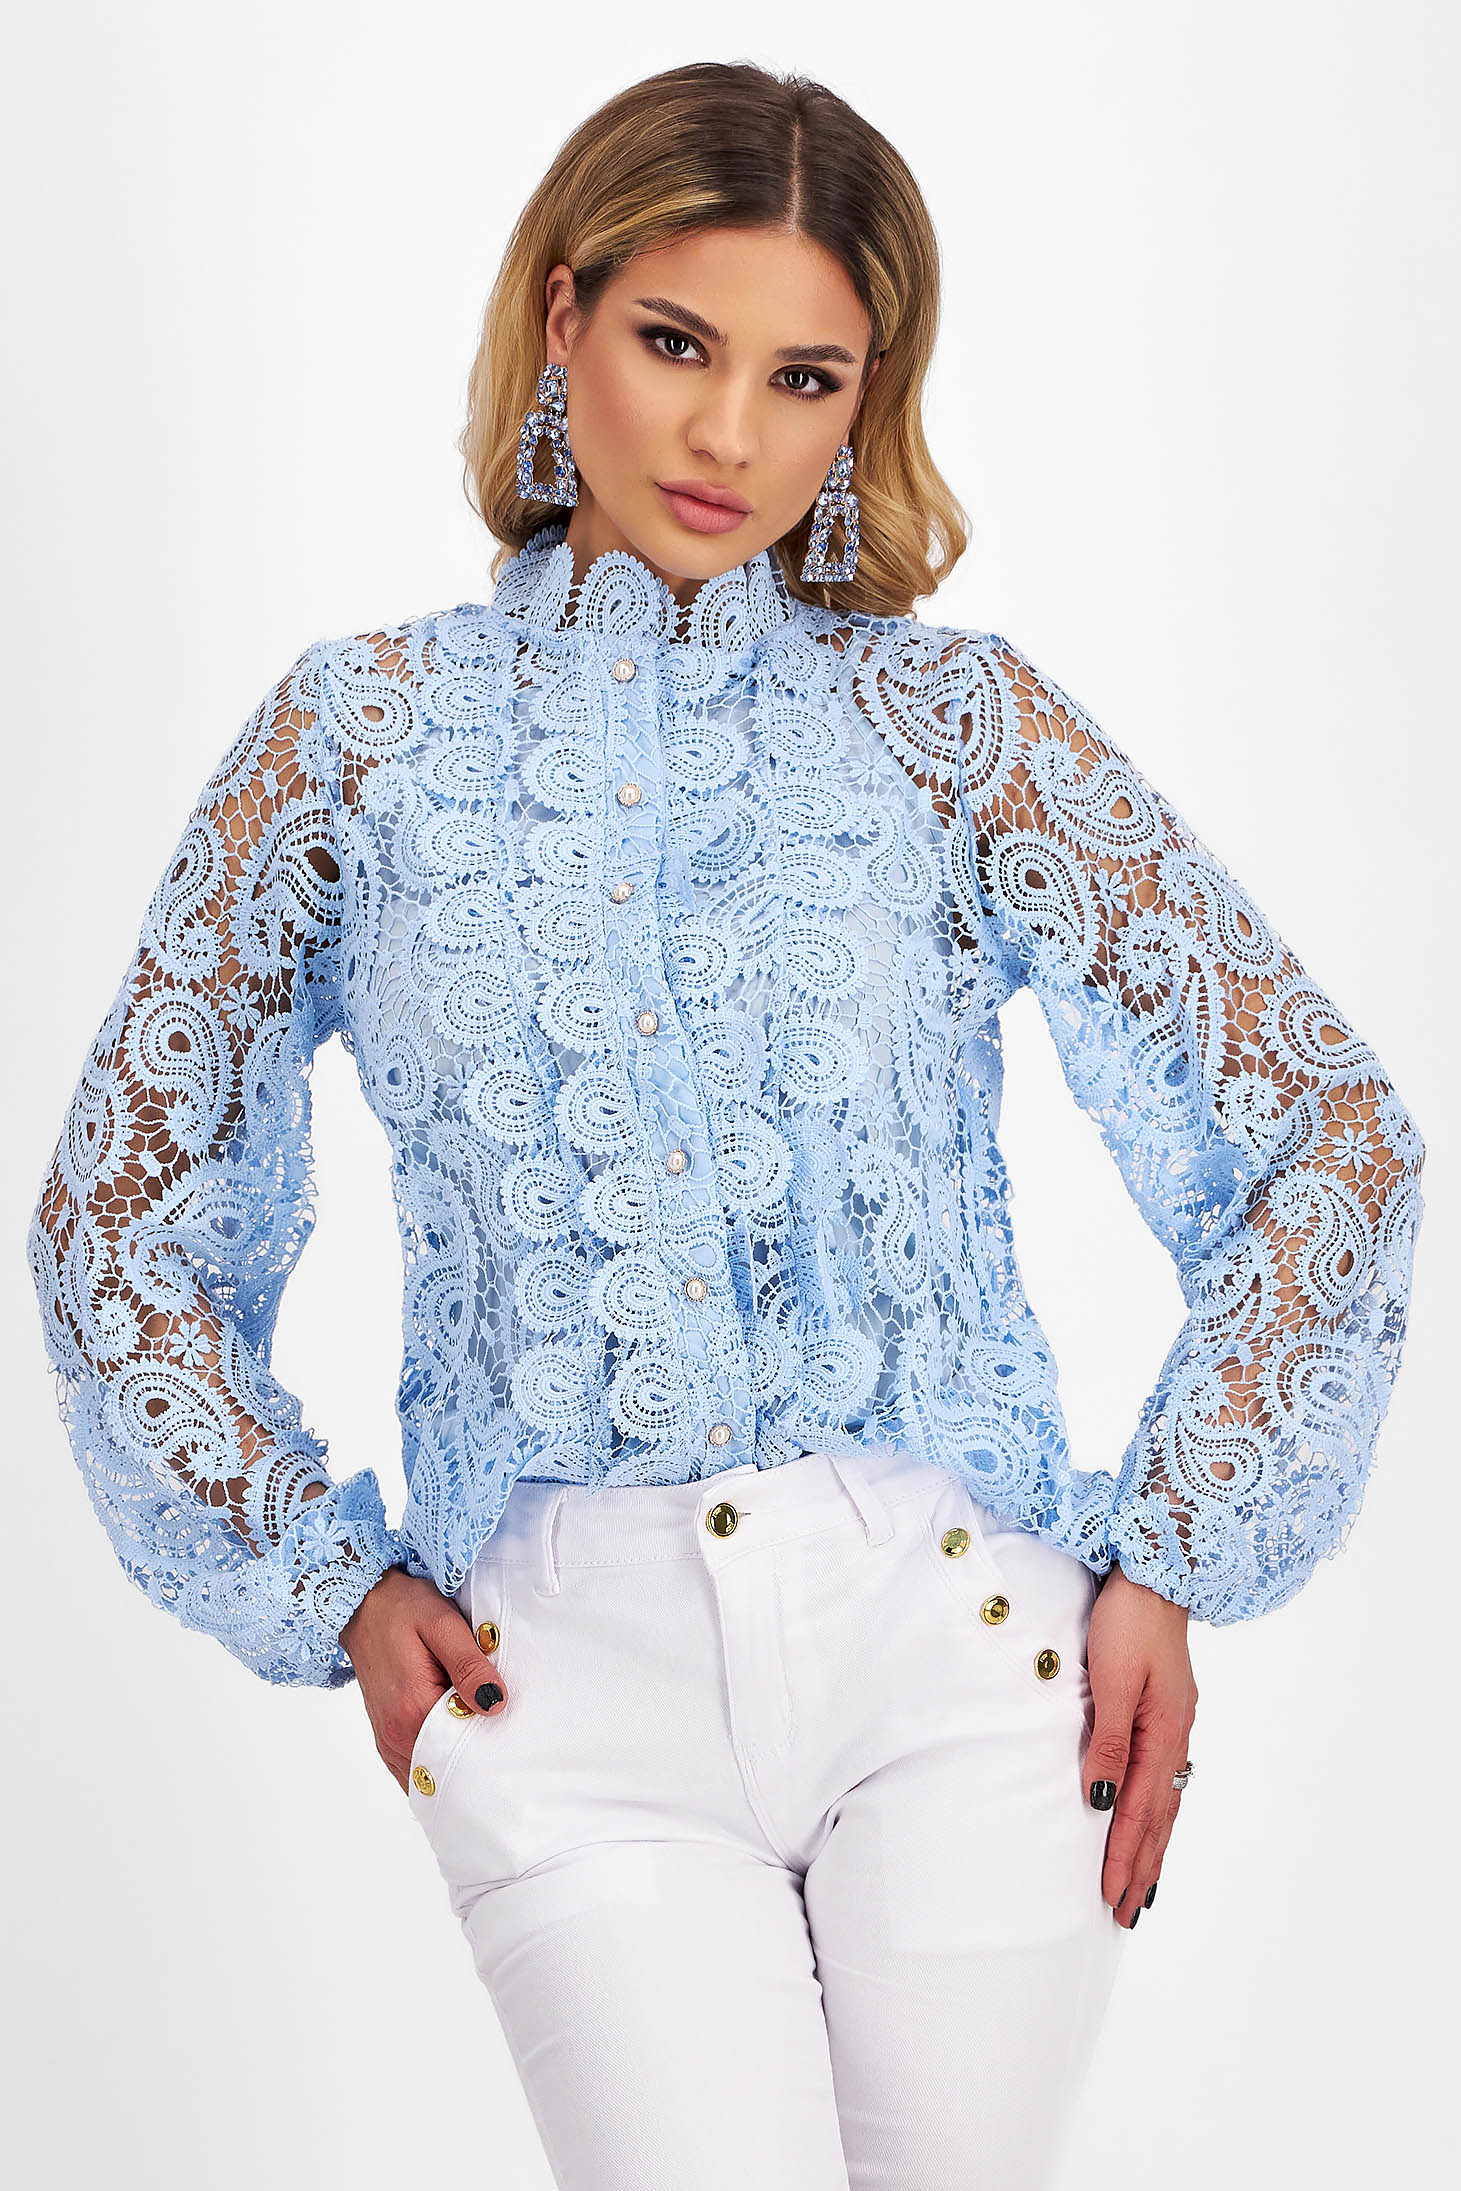 Ladies' Light Blue Macrame Lace Blouse with Puff Sleeves - SunShine